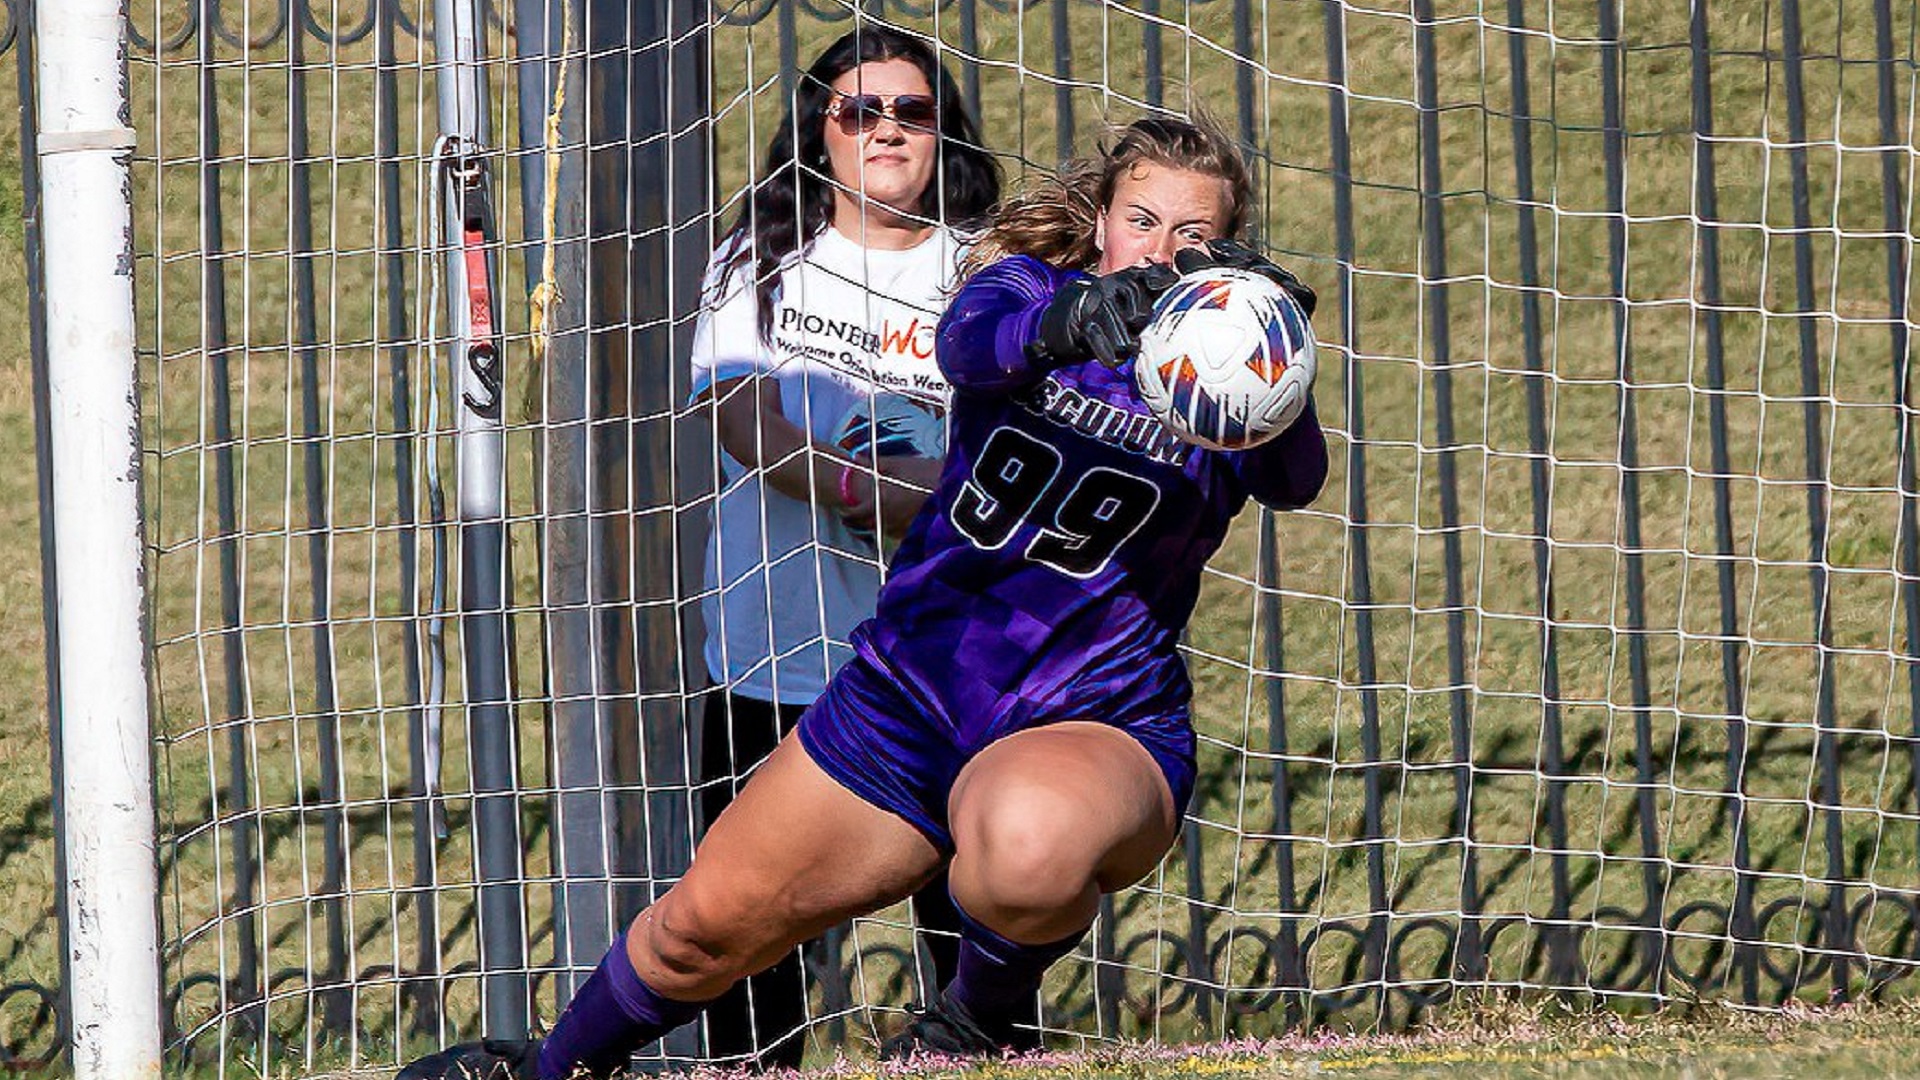 Harriman makes 15 saves for Pioneers at Anderson